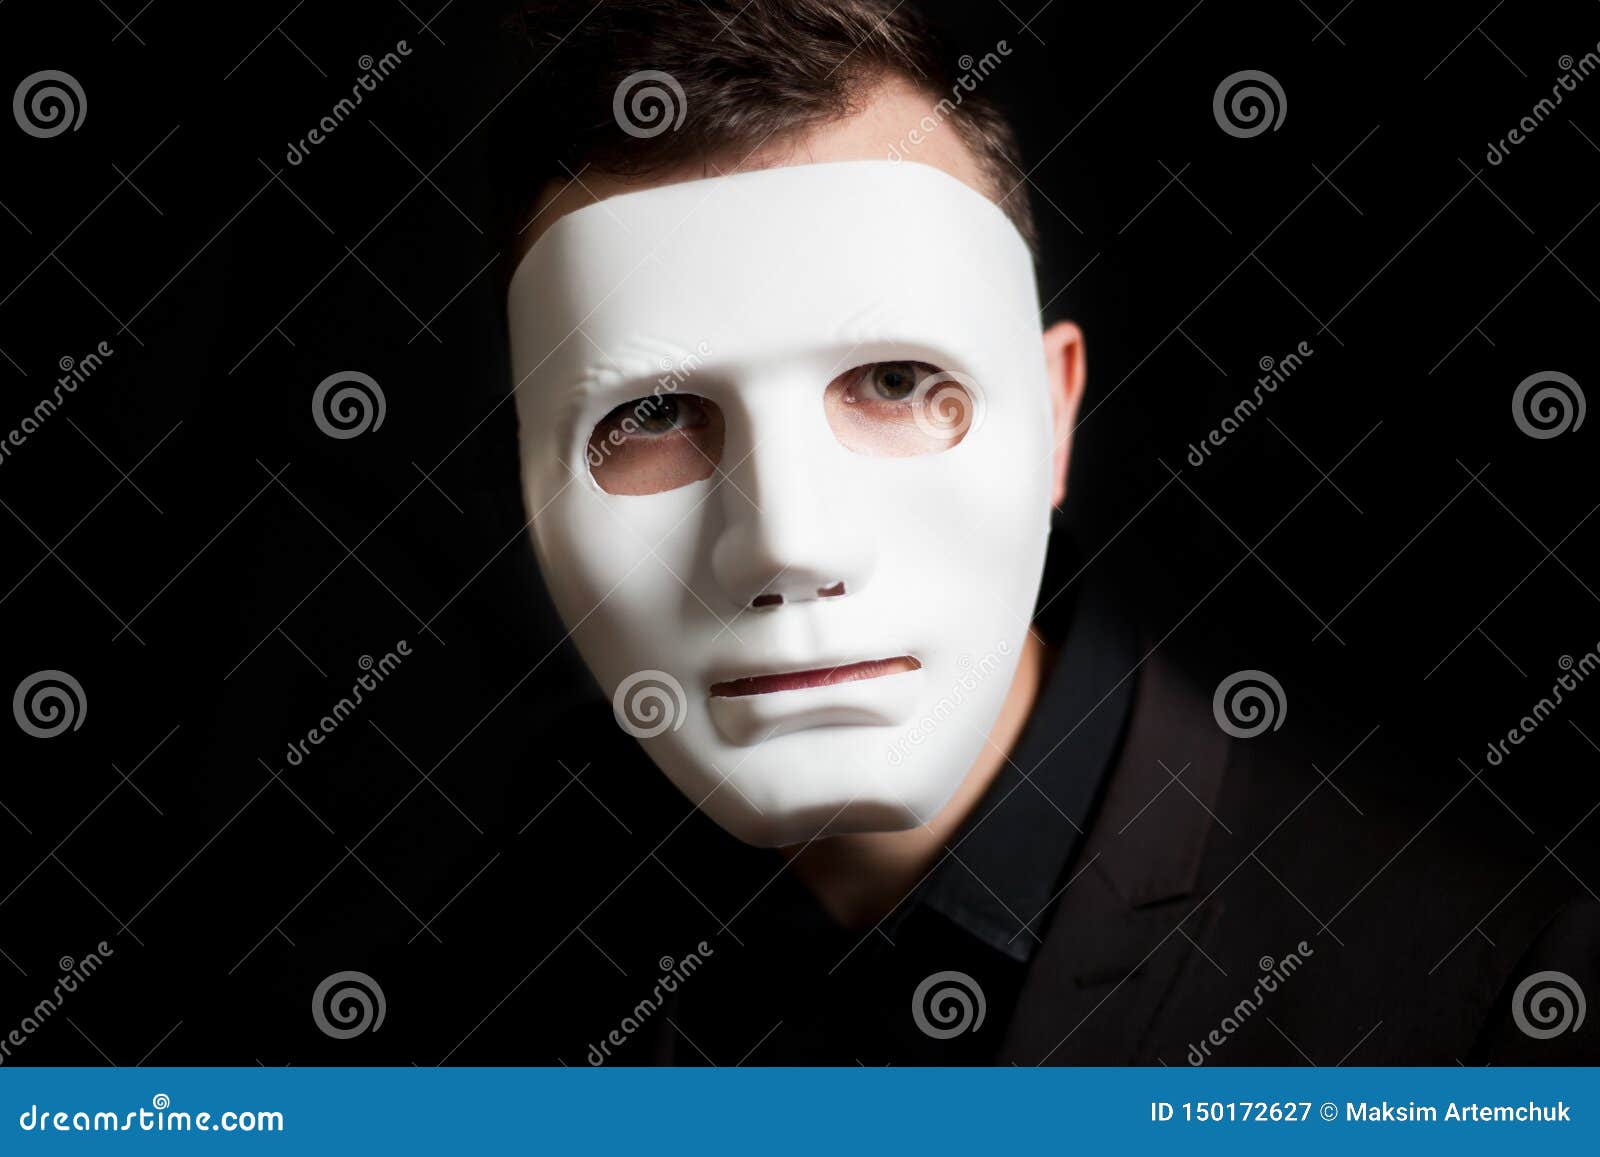 Close-up of a Man in a White Mask on a Black Background Stock Image ...